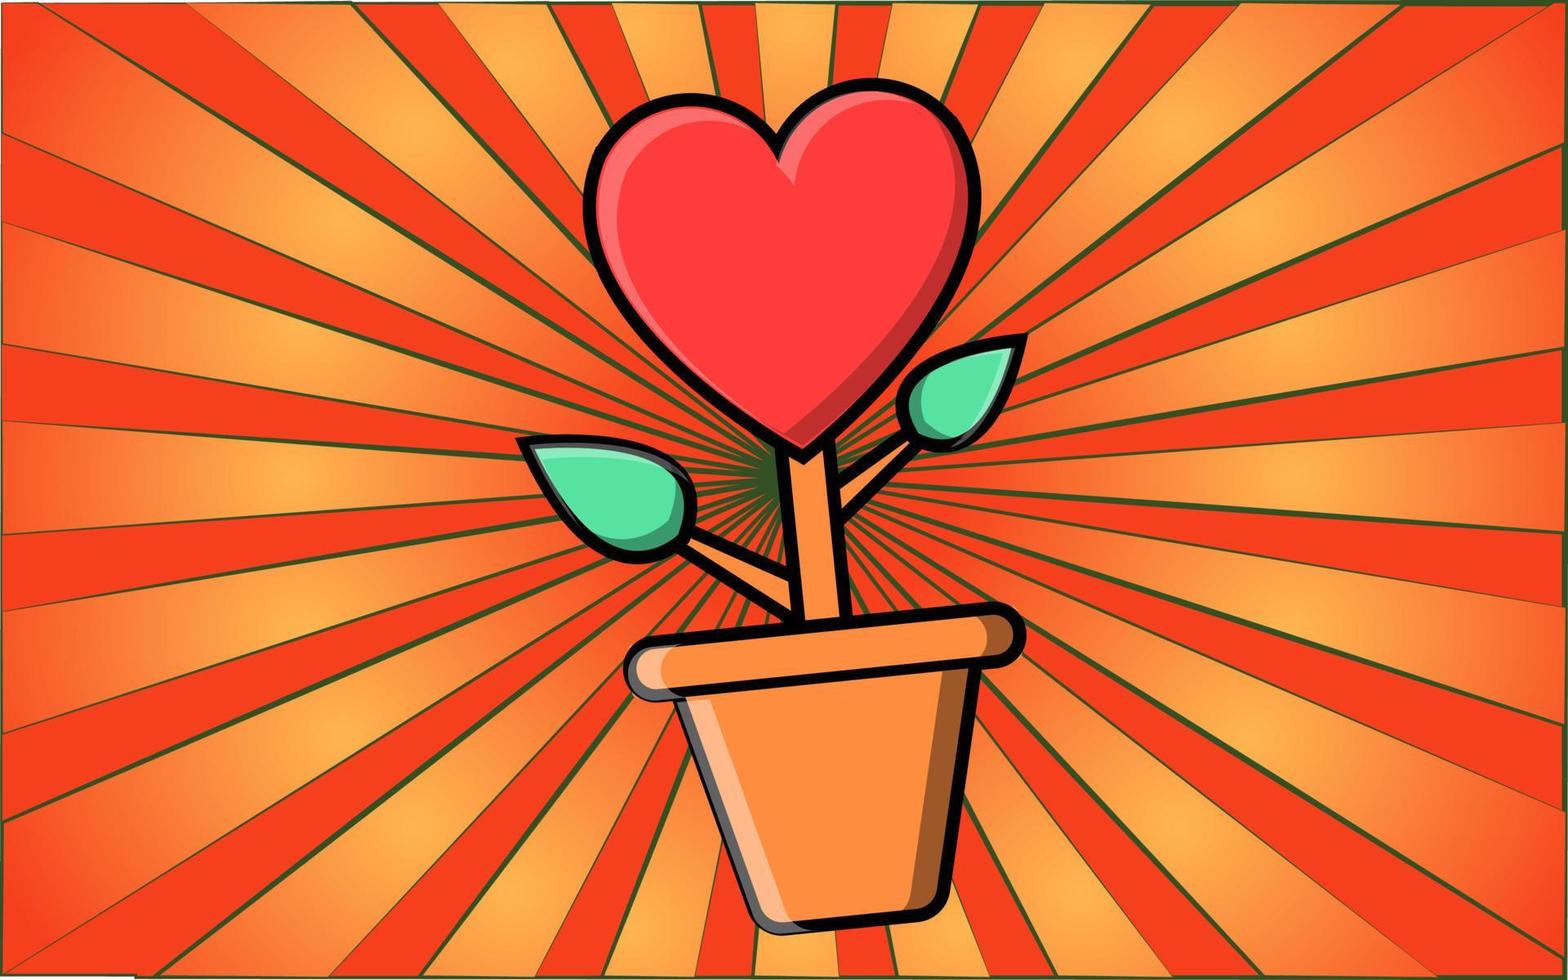 Simple flat style icon of a beautiful flower in a pot with a heart for the holiday of love, Valentine's Day or March 8th. Vector illustration